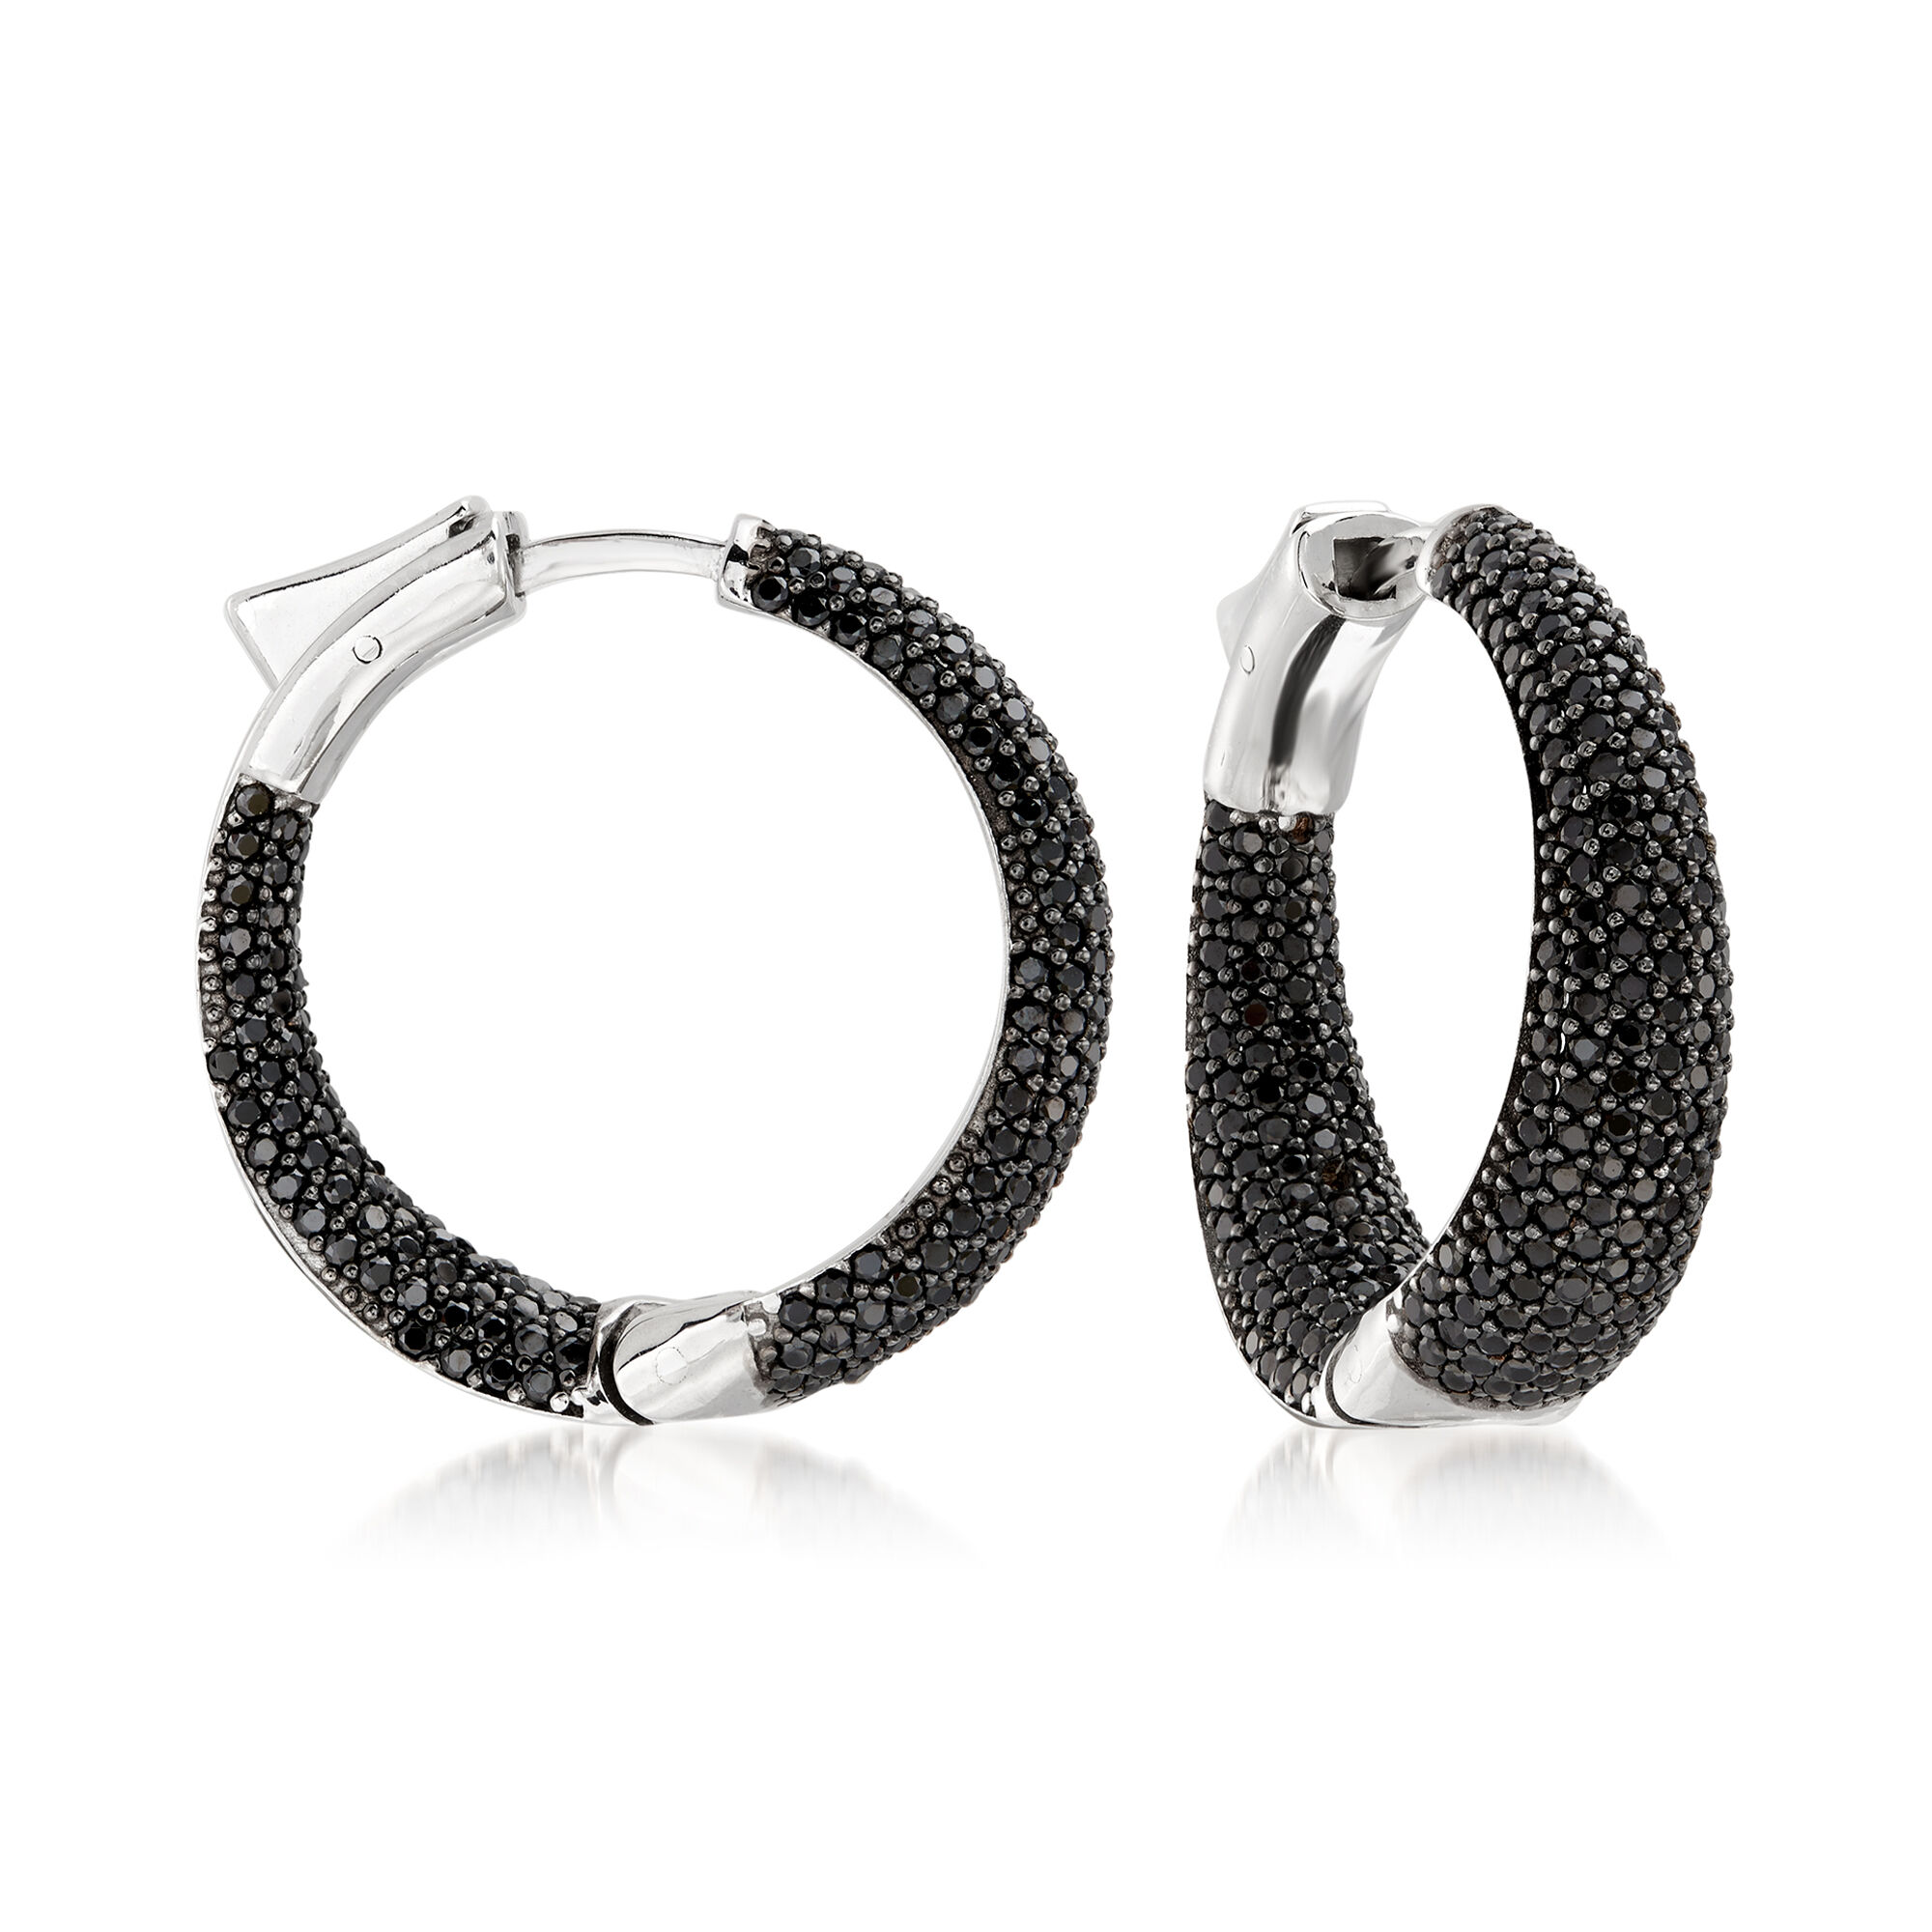 Hoop Earrings for Women Gifts 9 ctw Shop LC Black Spinel Hoops Rosetone/Platinum Plated